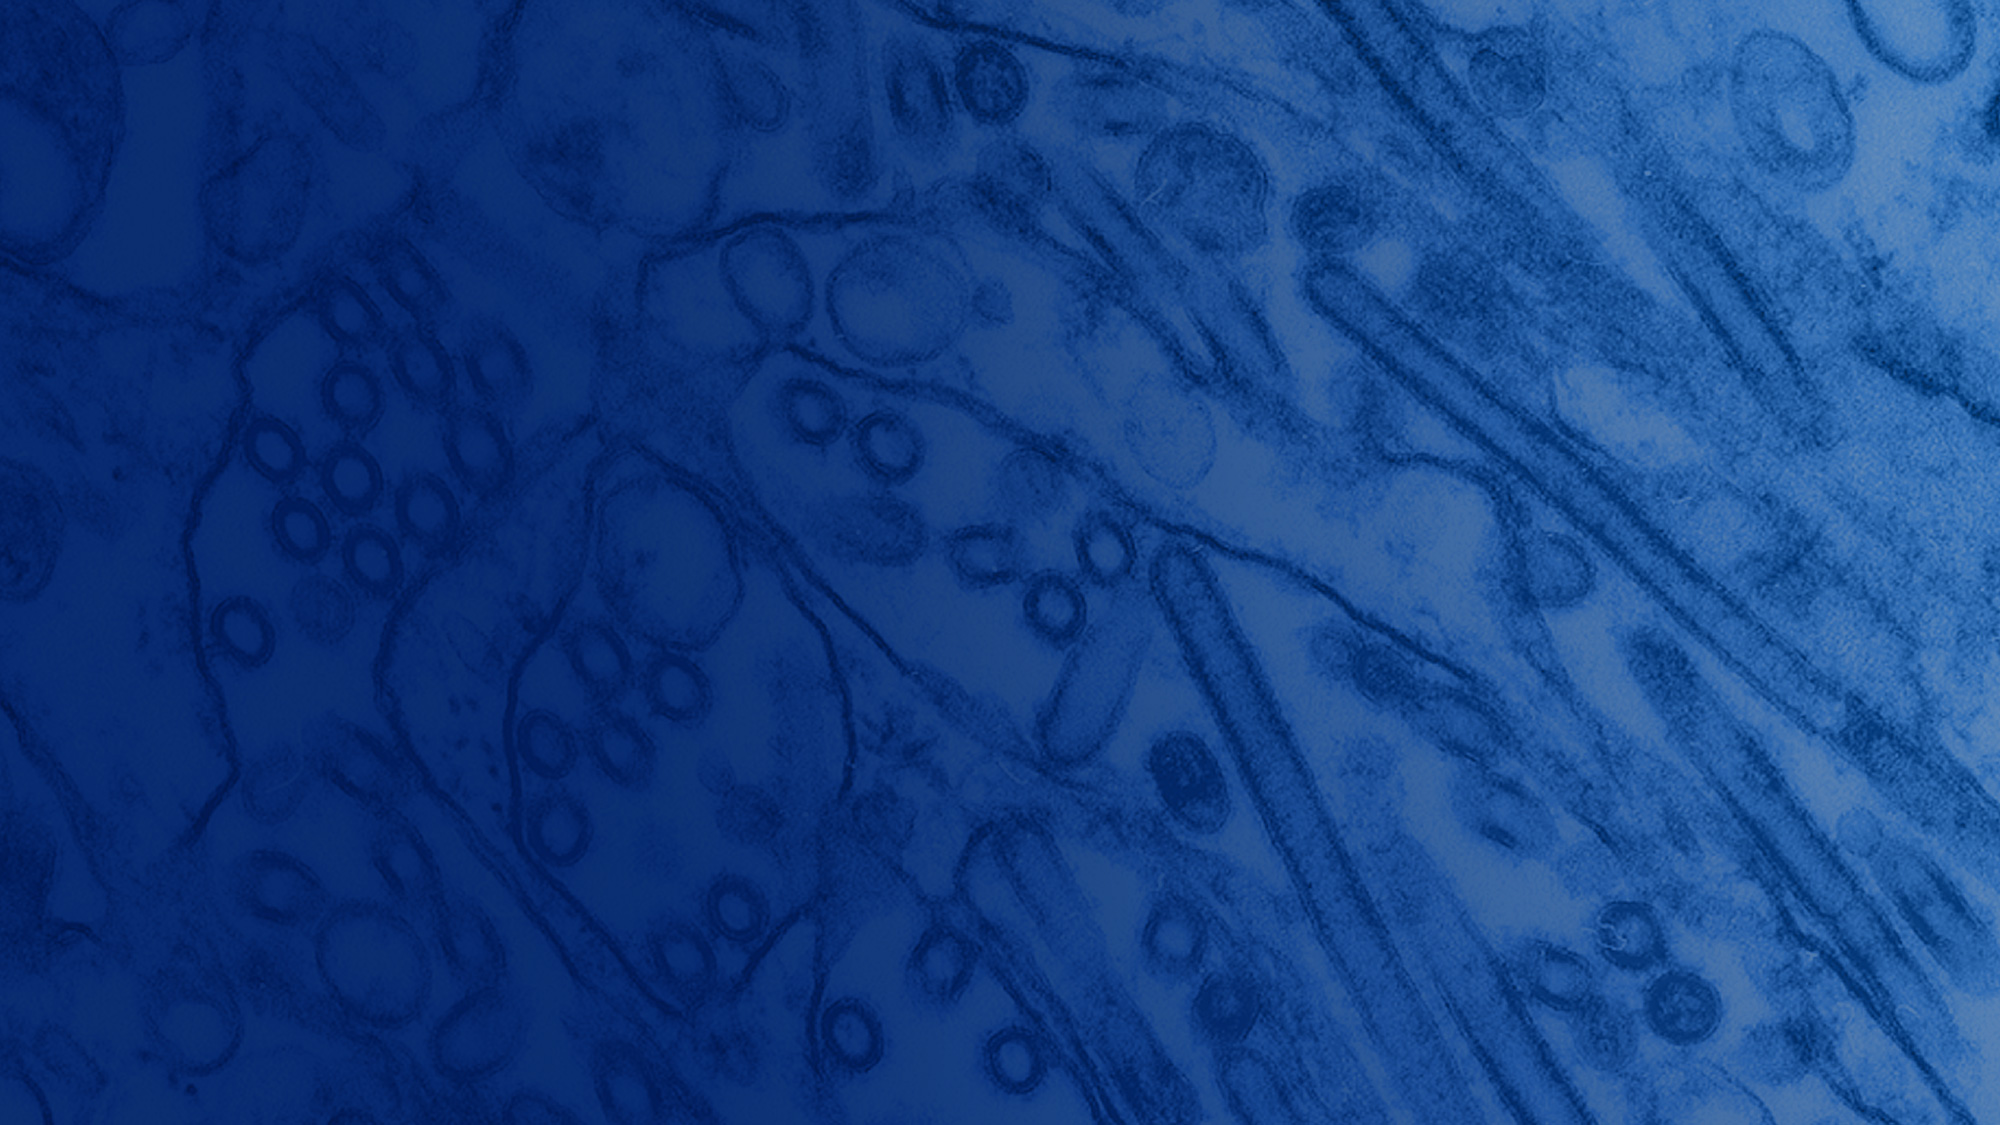 digitally-colorized transmission electron microscopic (TEM) image of Avian Influenza A H5N1 viruses grown in epithelial cells. Photo by CDC on Unsplash.